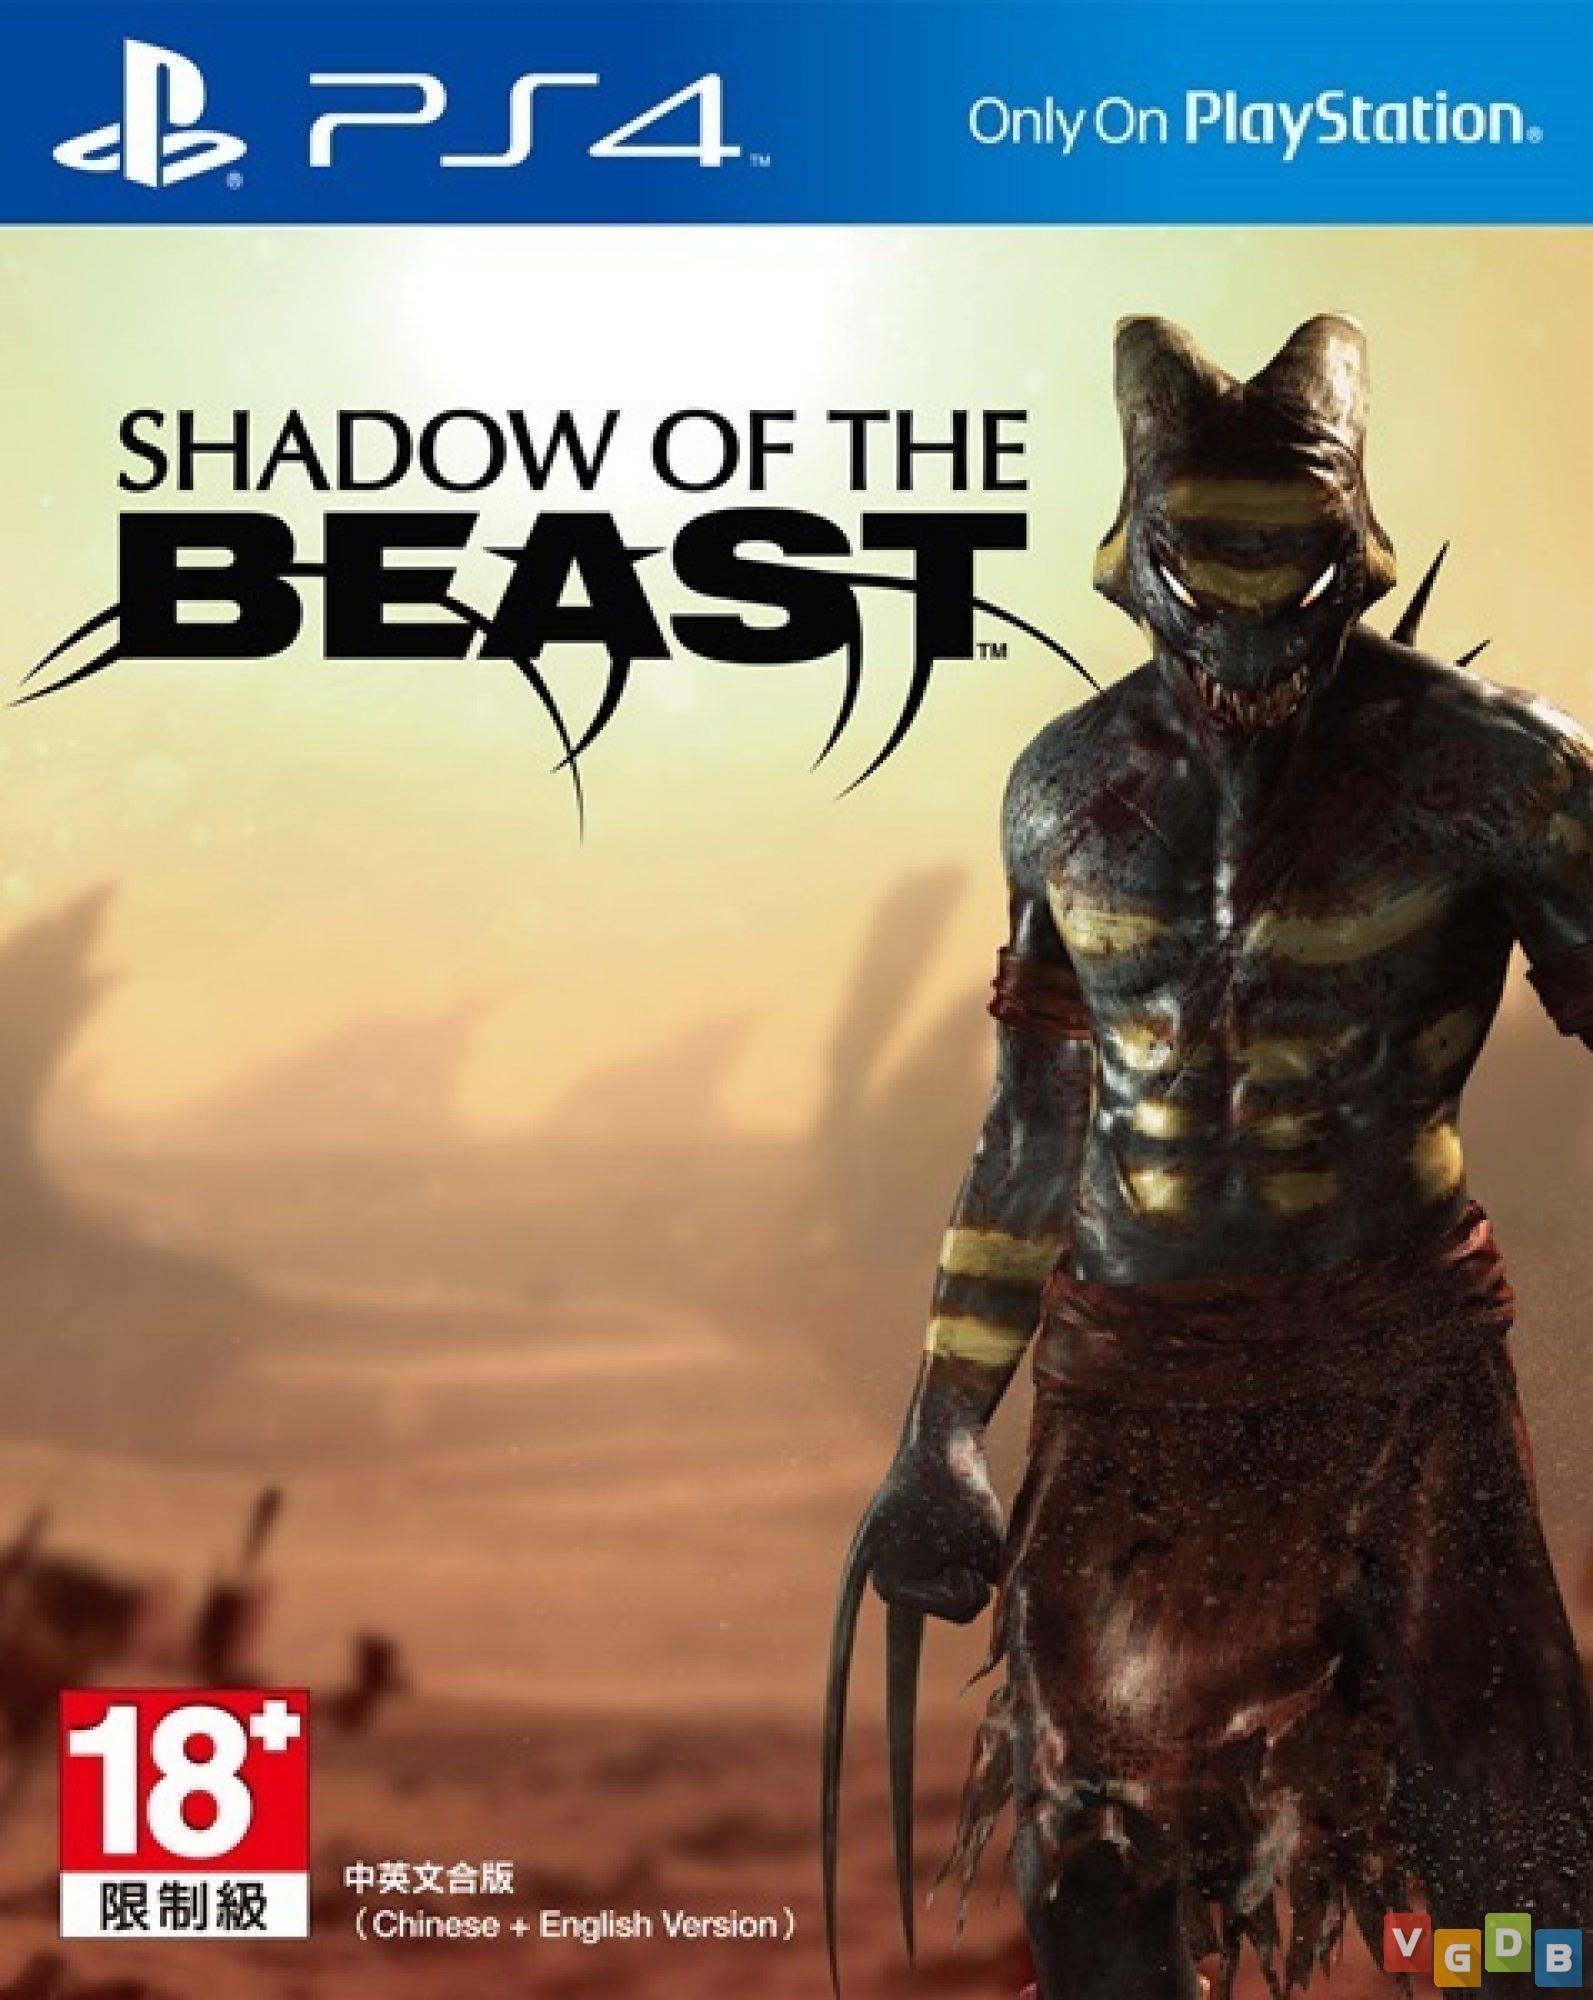 Beasts ps4. Shadow of the Beast ps4. Shadow of the Beast 2016 PLAYSTATION 4. Shadow of the Beast (2016 Video game). Shadow of the Beast малетот.